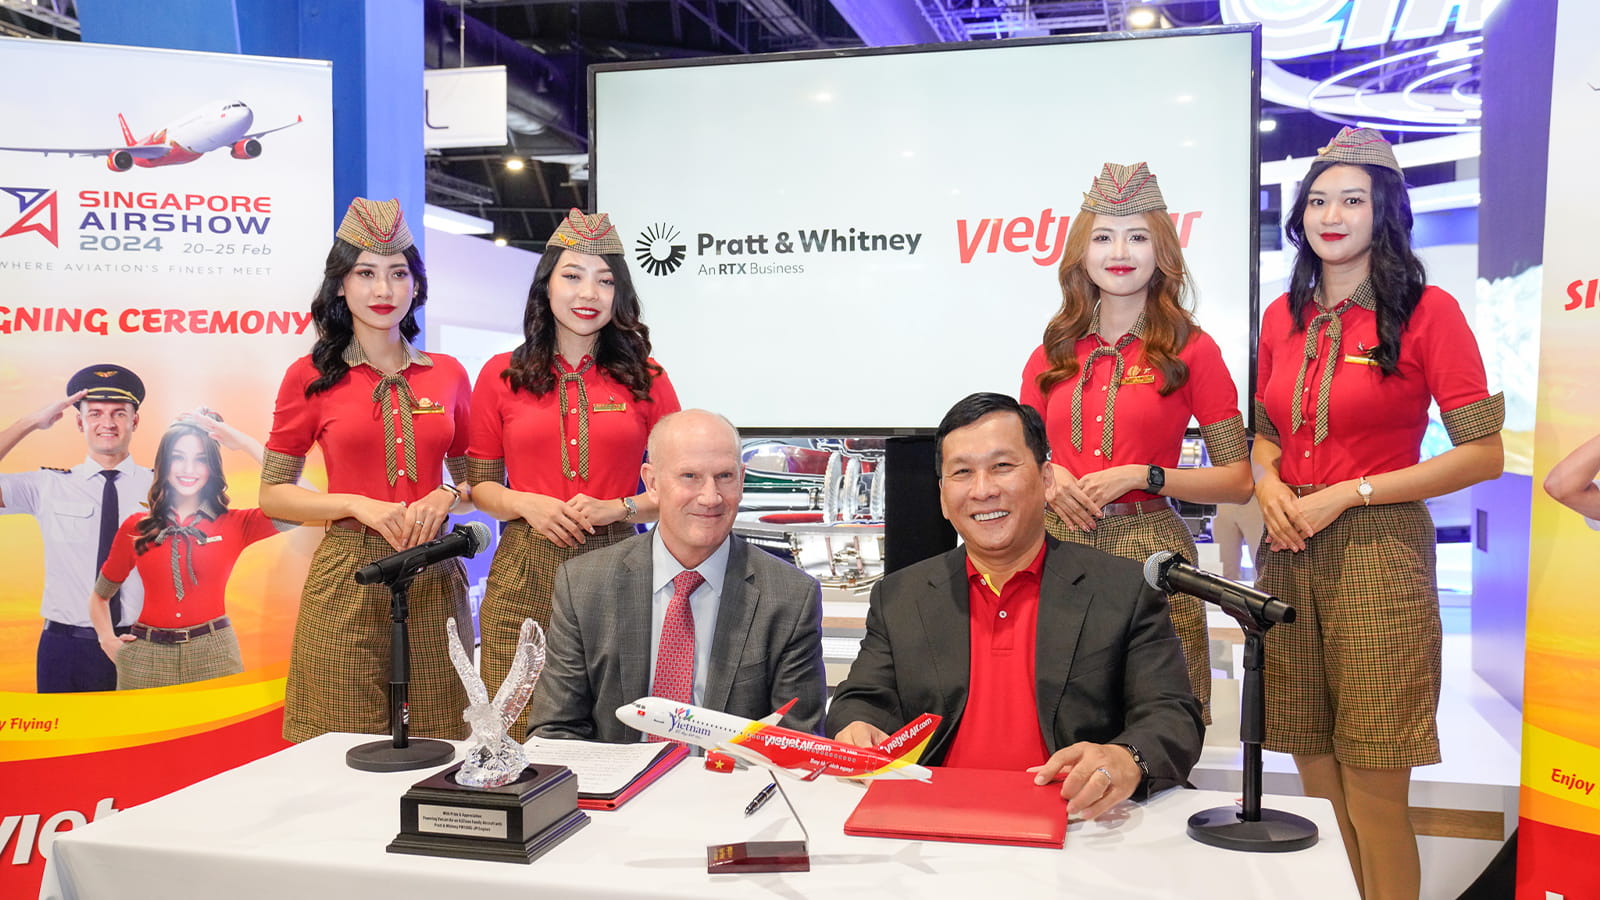 Rick Deurloo, president of Commercial Engines at Pratt & Whitney (left) and Dinh Viet Phuong, CEO, Vietjet (right) signing an agreement for RTX’s Pratt & Whitney to provide GTF engines for 19 additional A321neo aircraft for Vietjet